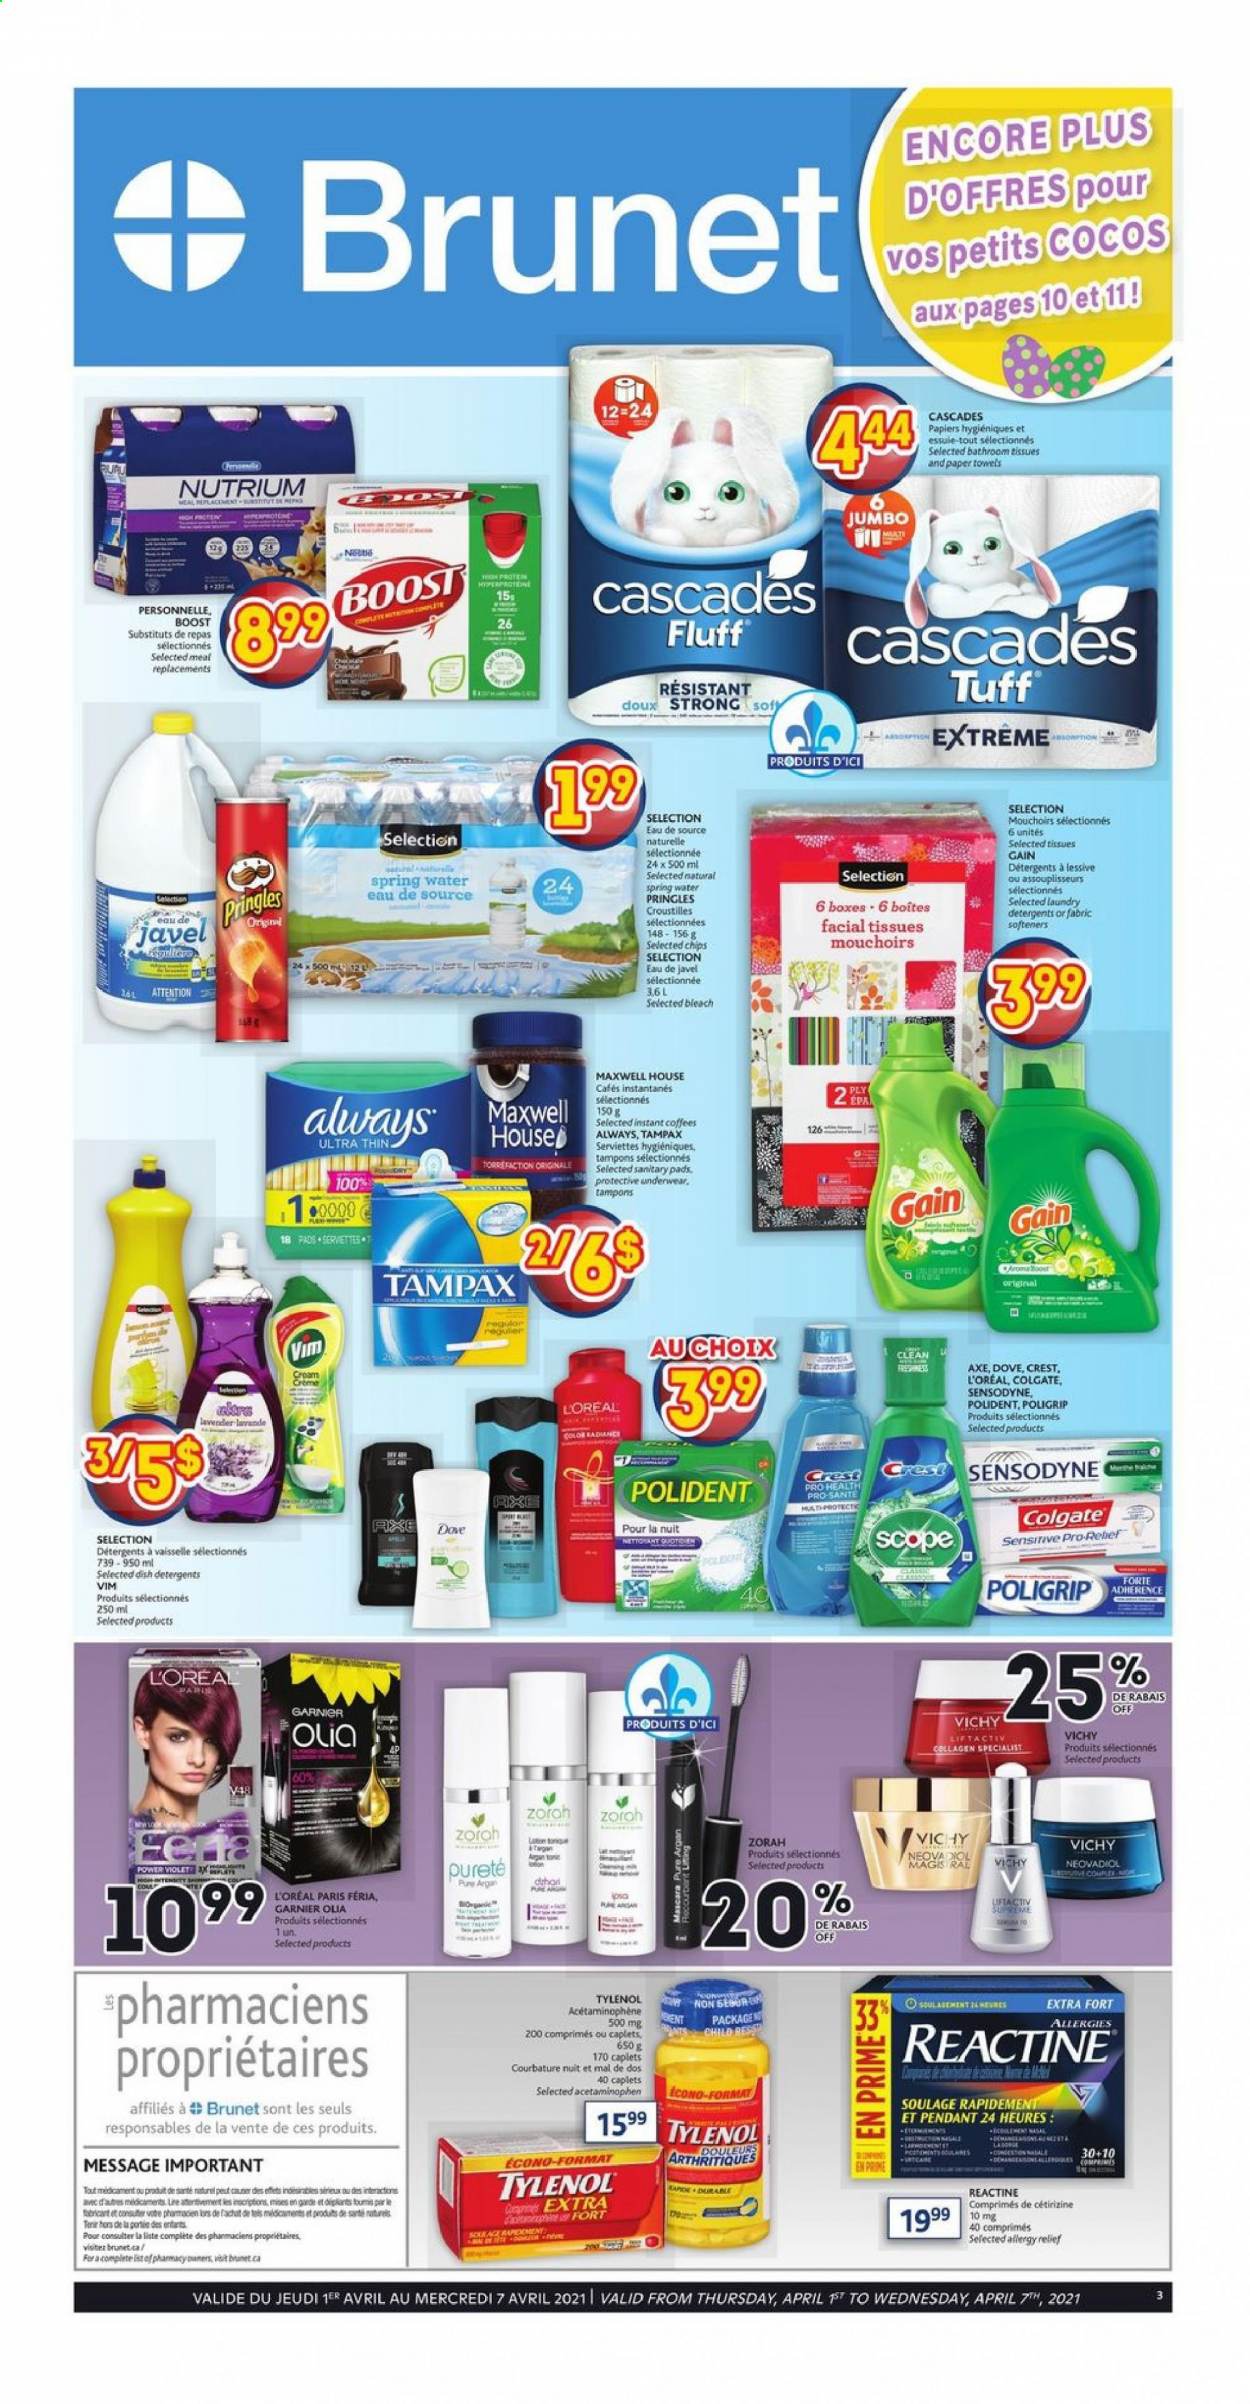 thumbnail - Brunet Flyer - April 01, 2021 - April 07, 2021 - Sales products - toilet paper, tissues, kitchen towels, paper towels, Gain, bleach, Vichy, Polident, Crest, sanitary pads, tampons, facial tissues, L’Oréal, Tylenol, allergy relief, Garnier, mascara, Tampax, Sensodyne. Page 1.